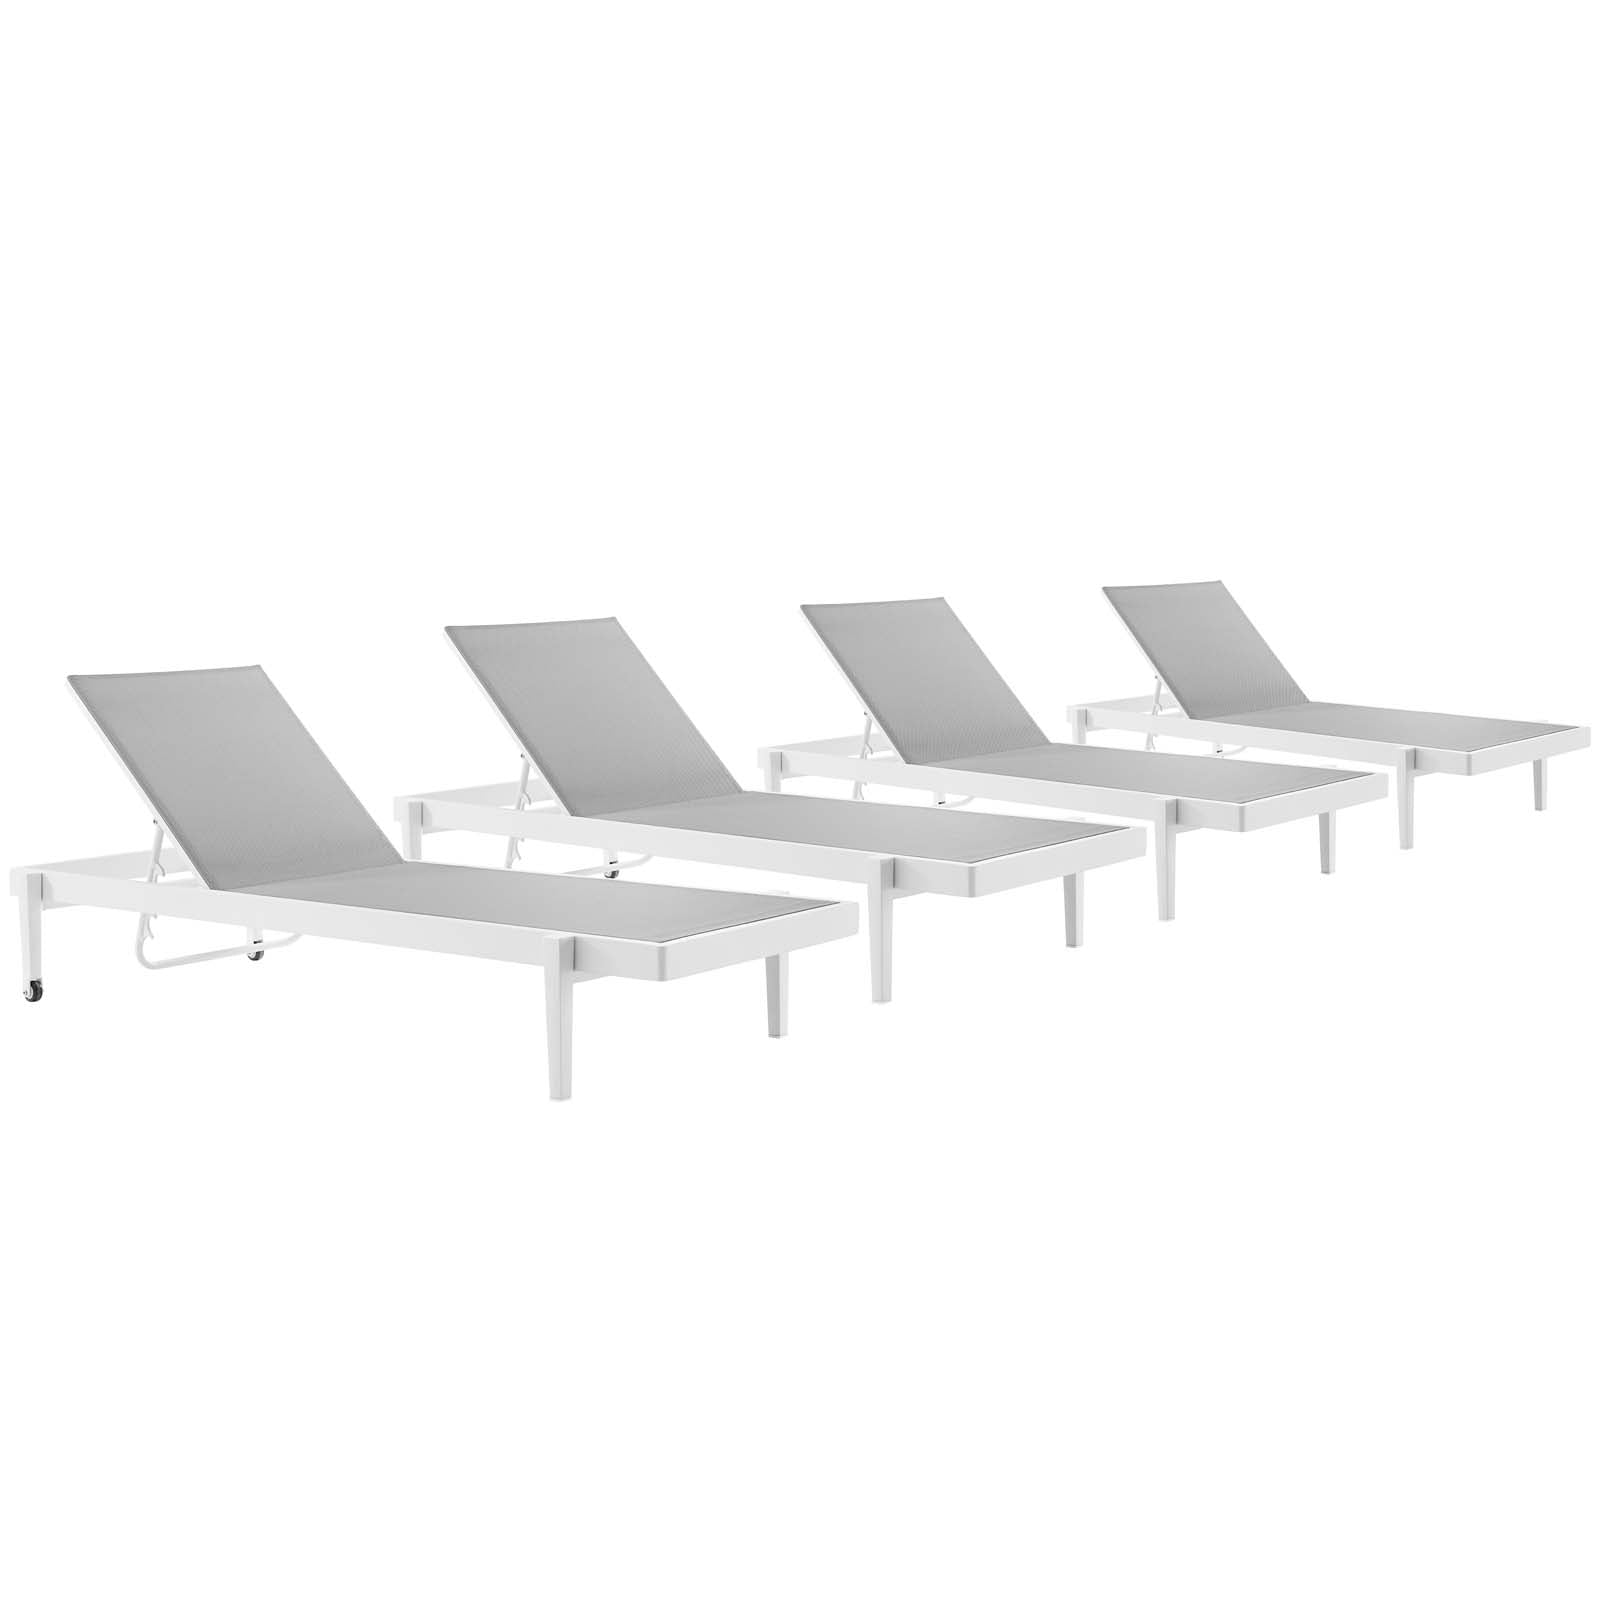 Charleston Outdoor Patio Aluminum Chaise Lounge Chair Set of 4 - East Shore Modern Home Furnishings